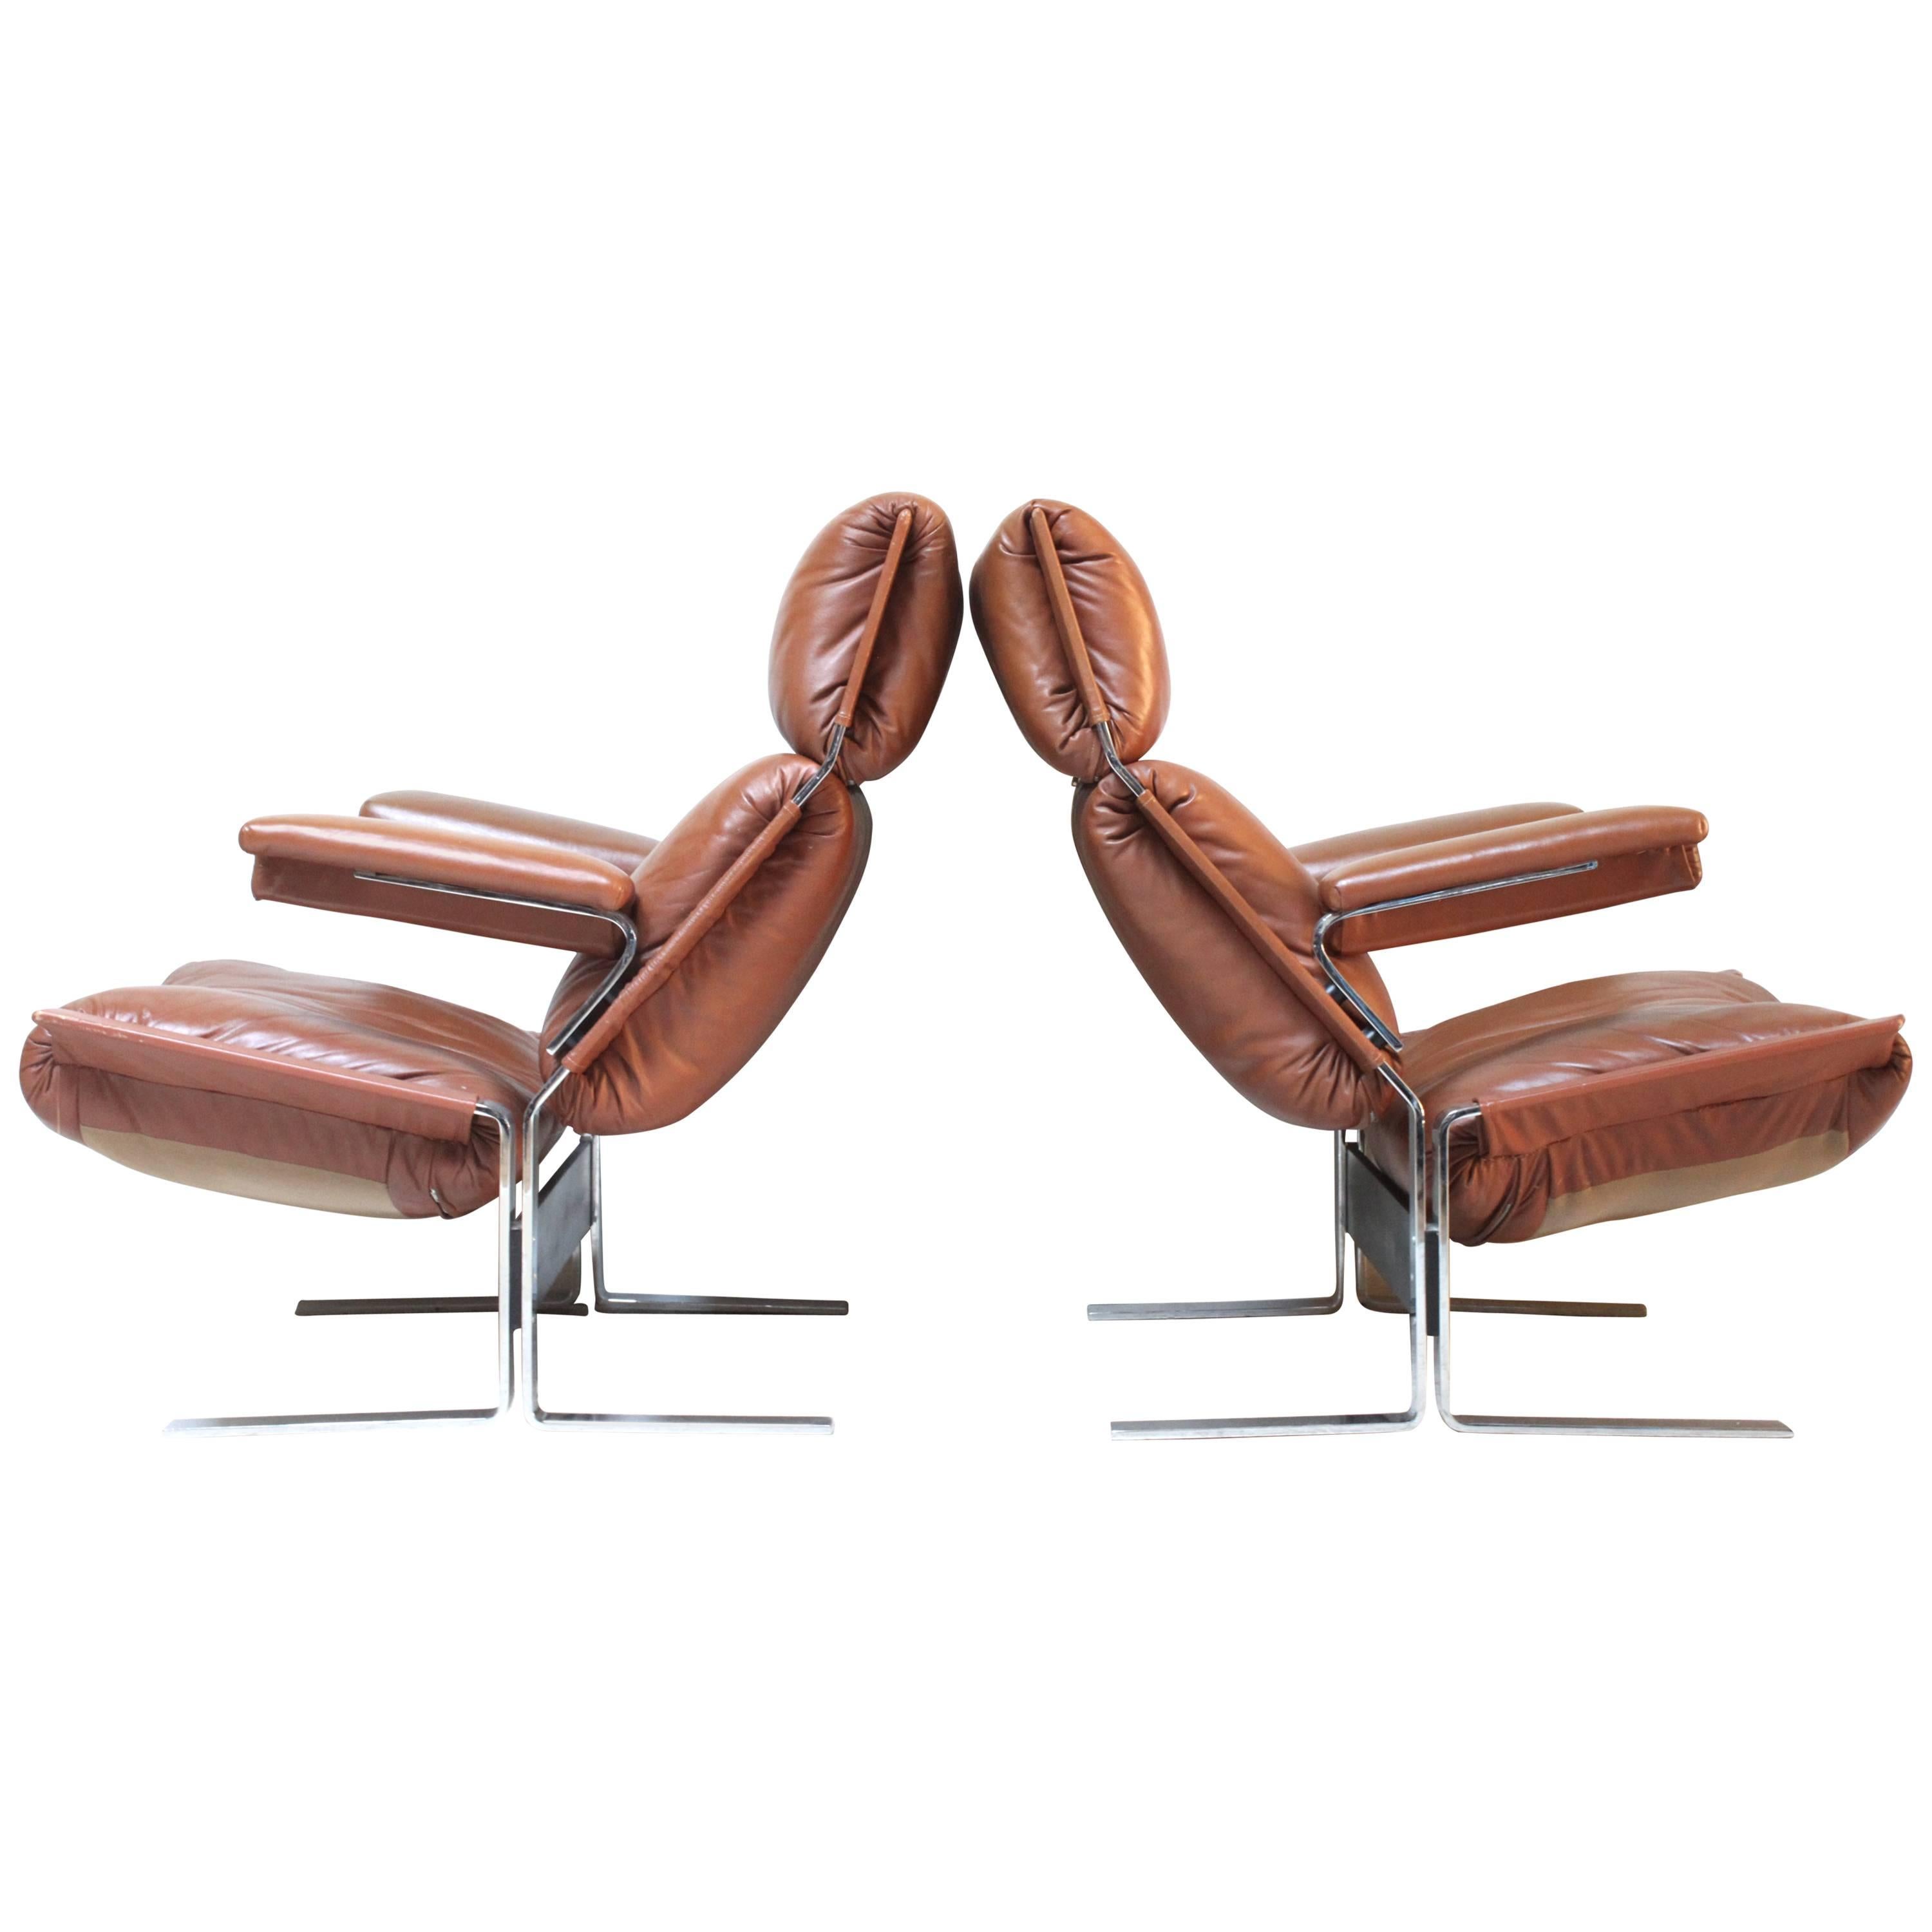 Pair of Lounge Chairs by Richard Hersberger